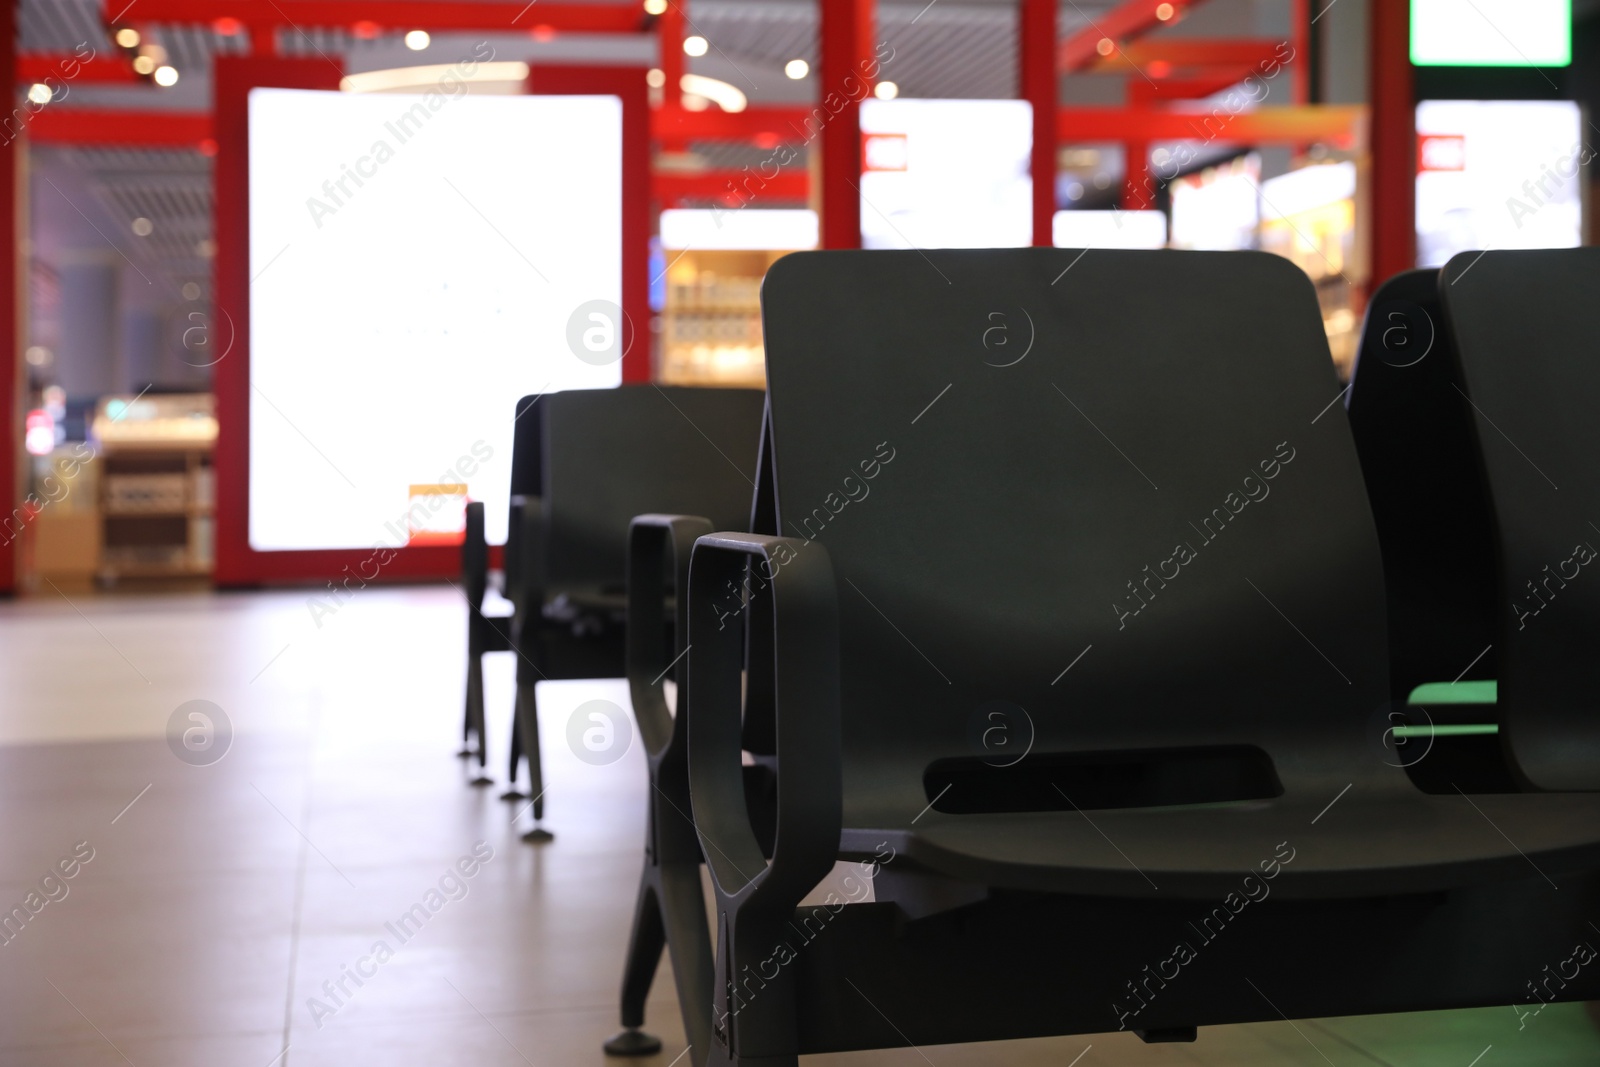 Photo of ISTANBUL, TURKEY - AUGUST 6, 2019: Empty seats in airport